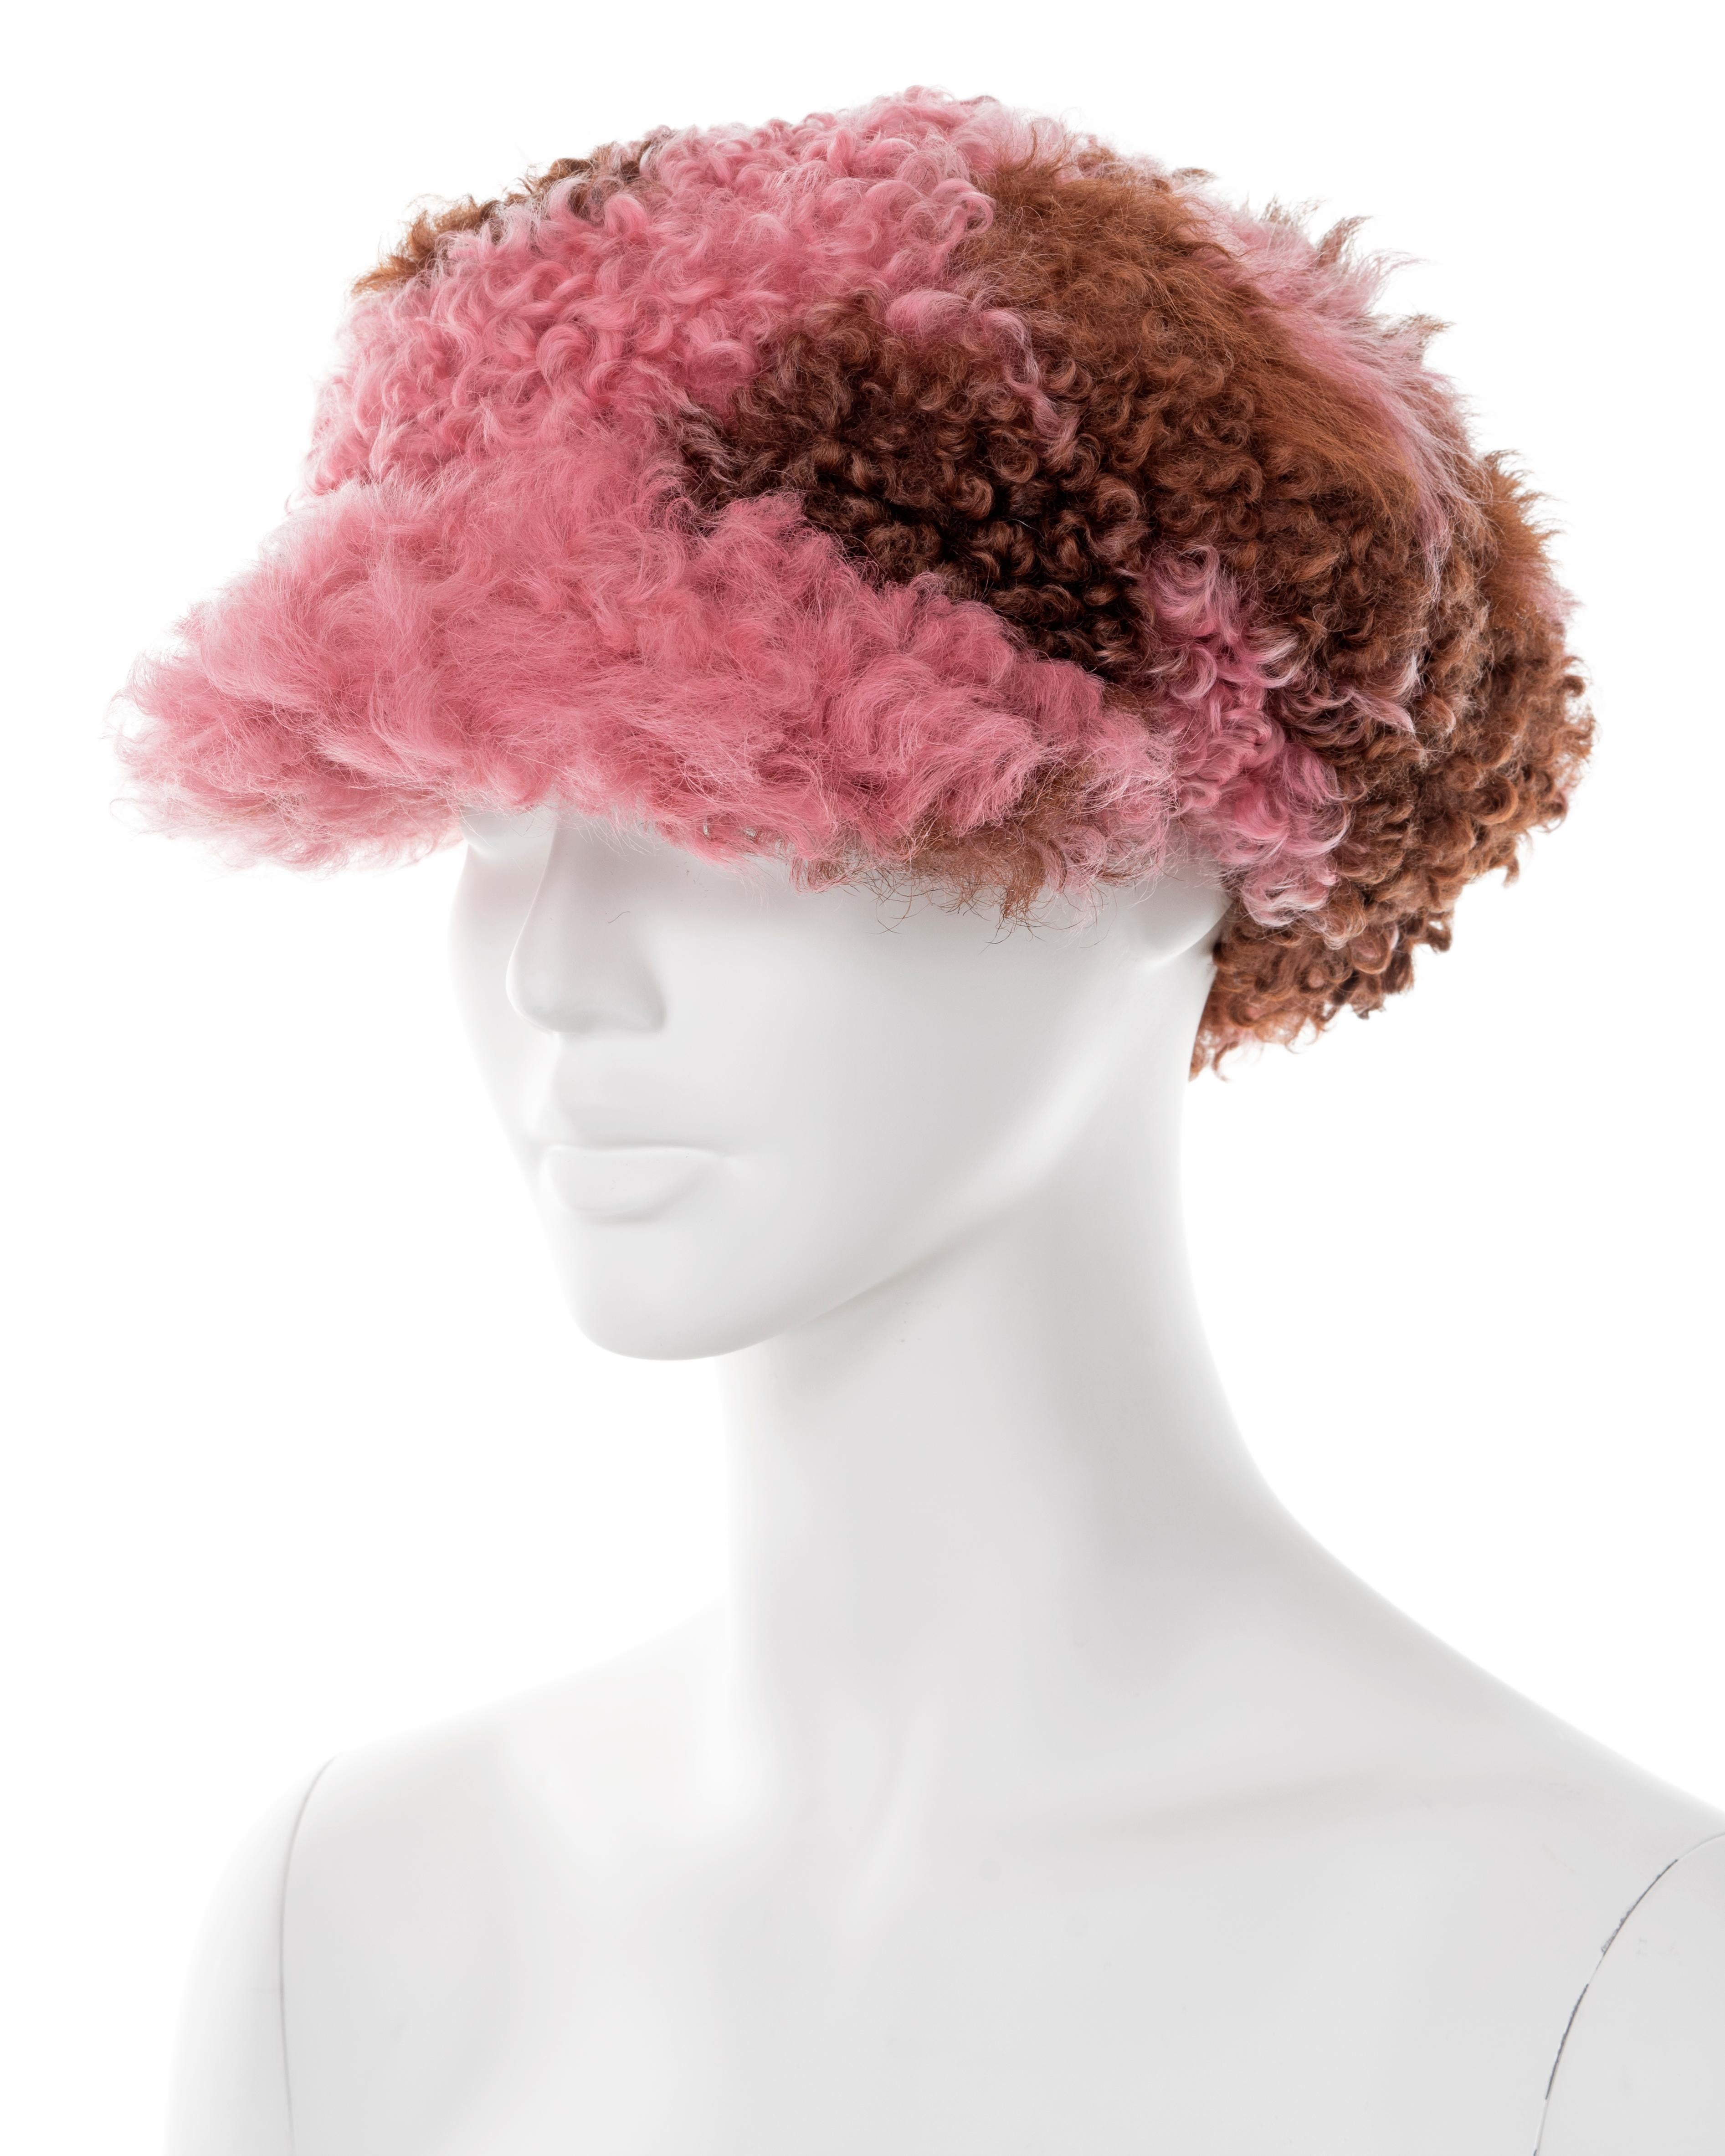 Prada pink and brown curly shearling 'newsboy' hat, fw 2017 1